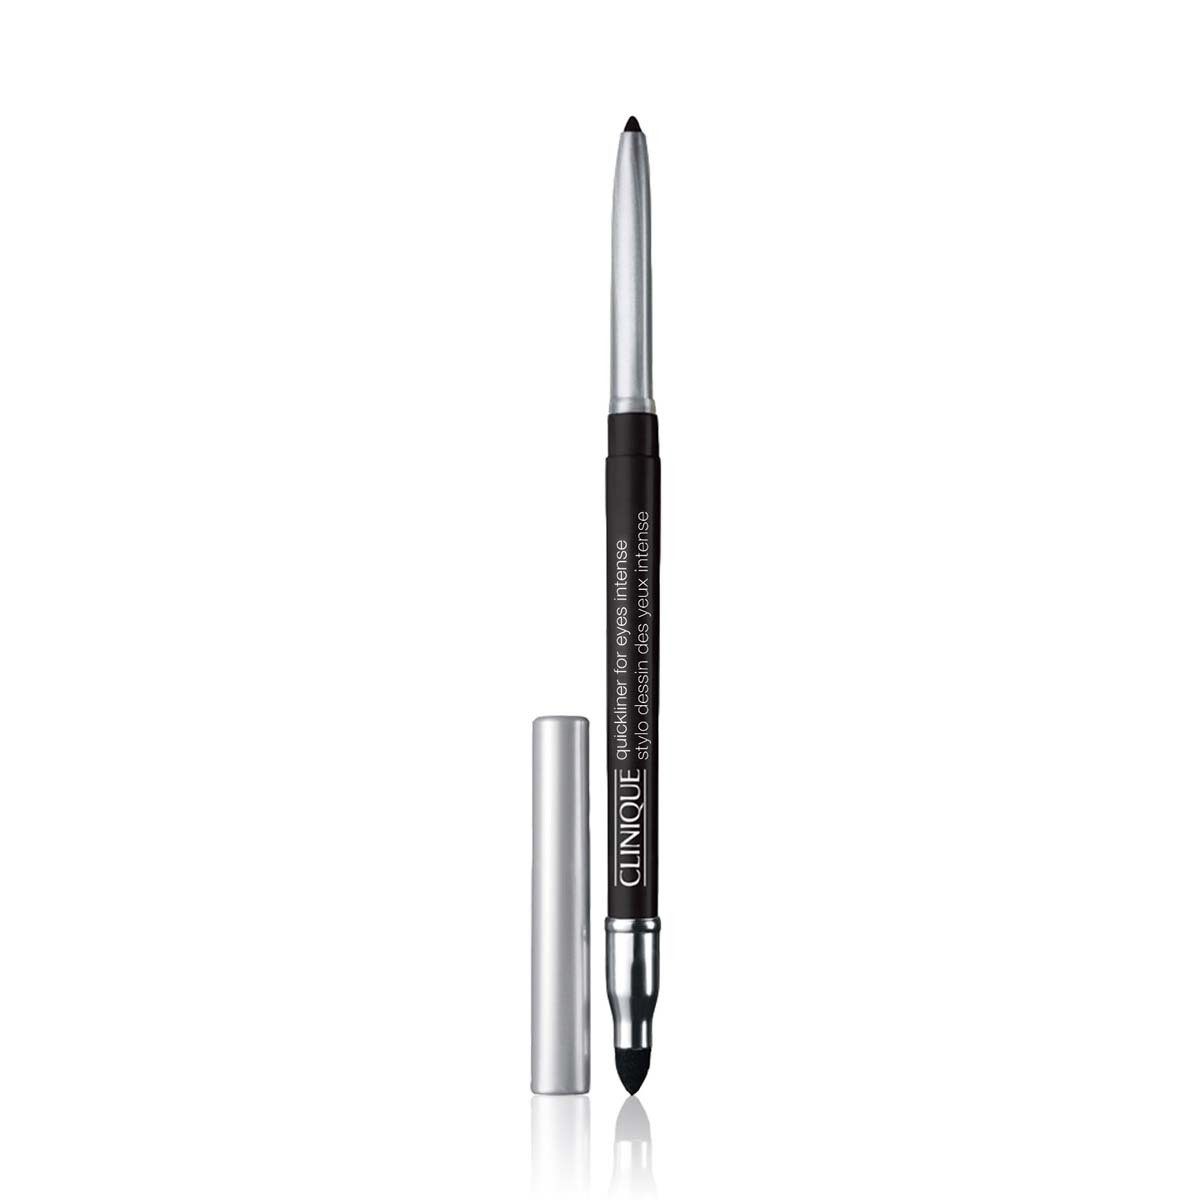 Clinique quickliner for eyes intense - 09 intense ebony, 09 INTENSE EBONY, large image number 0